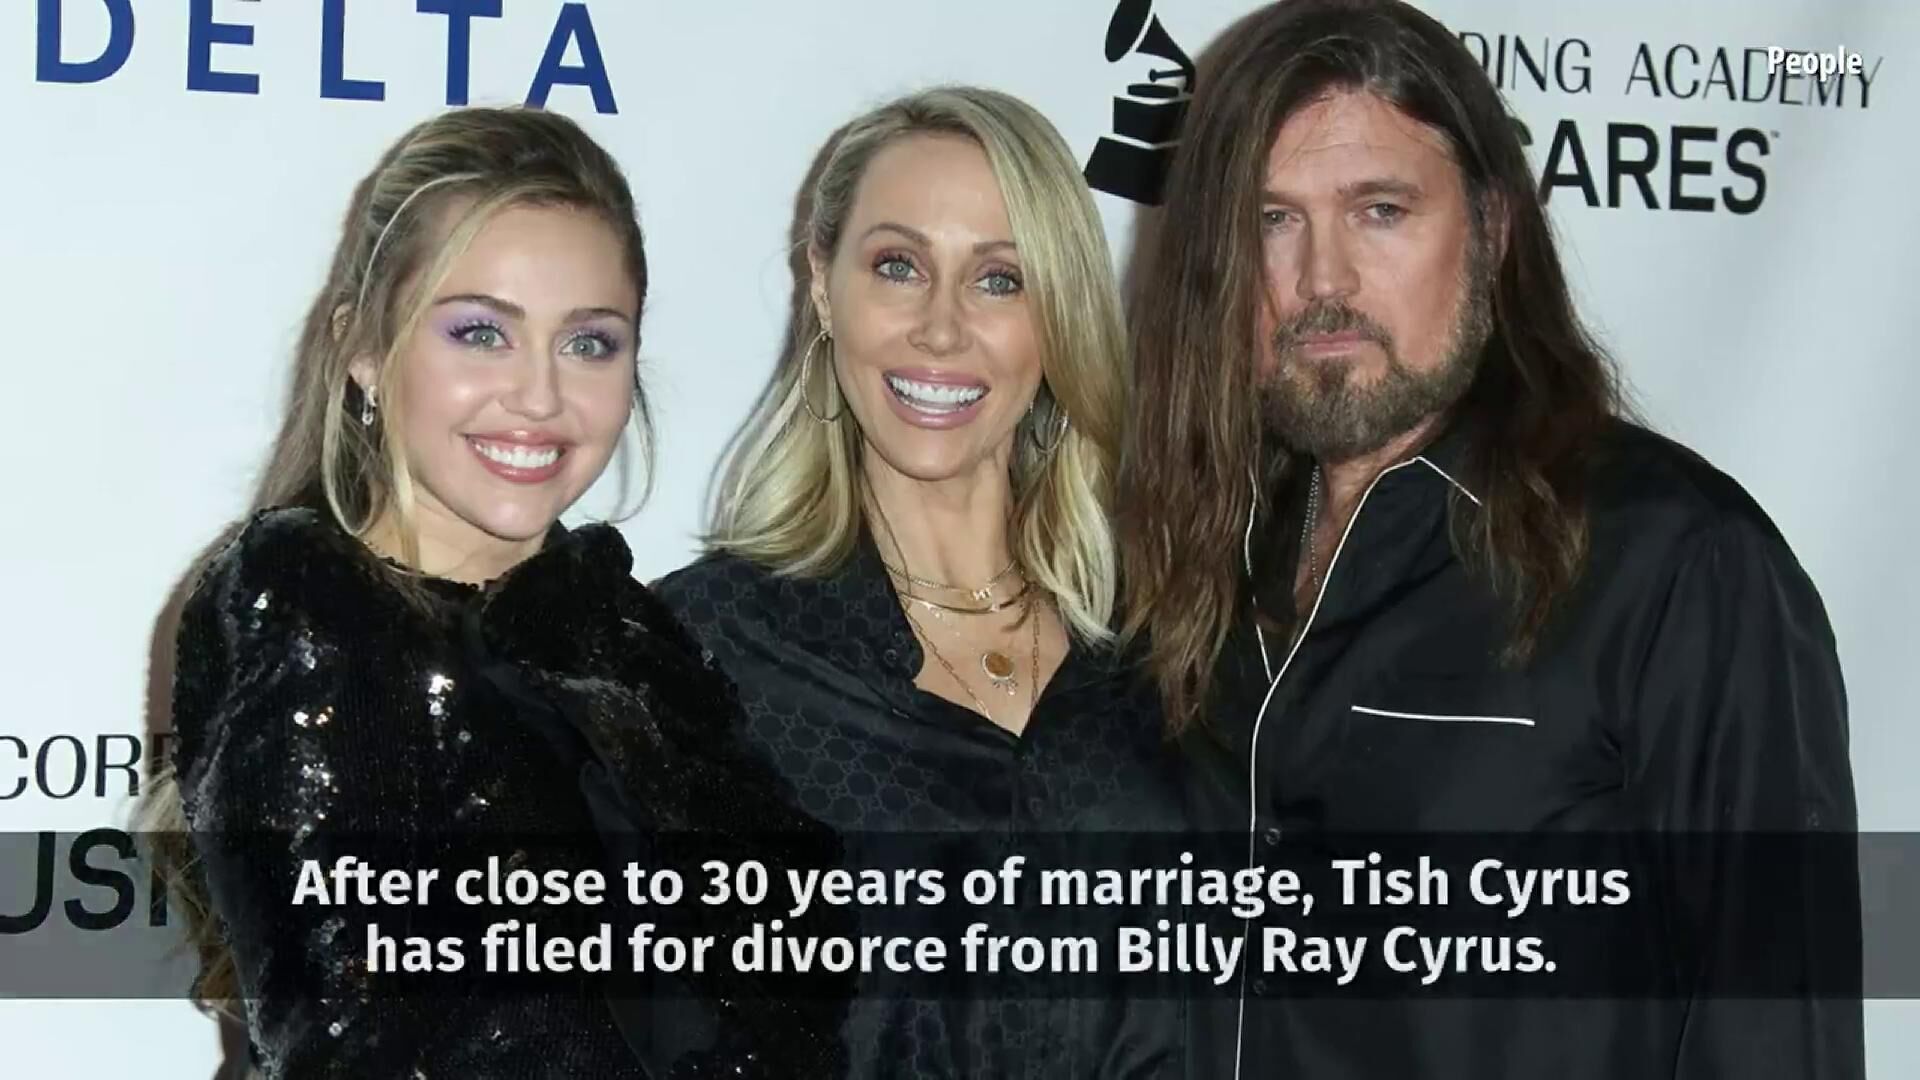 Tish Cyrus files for divorce from Billy Ray Cyrus Trending fox23